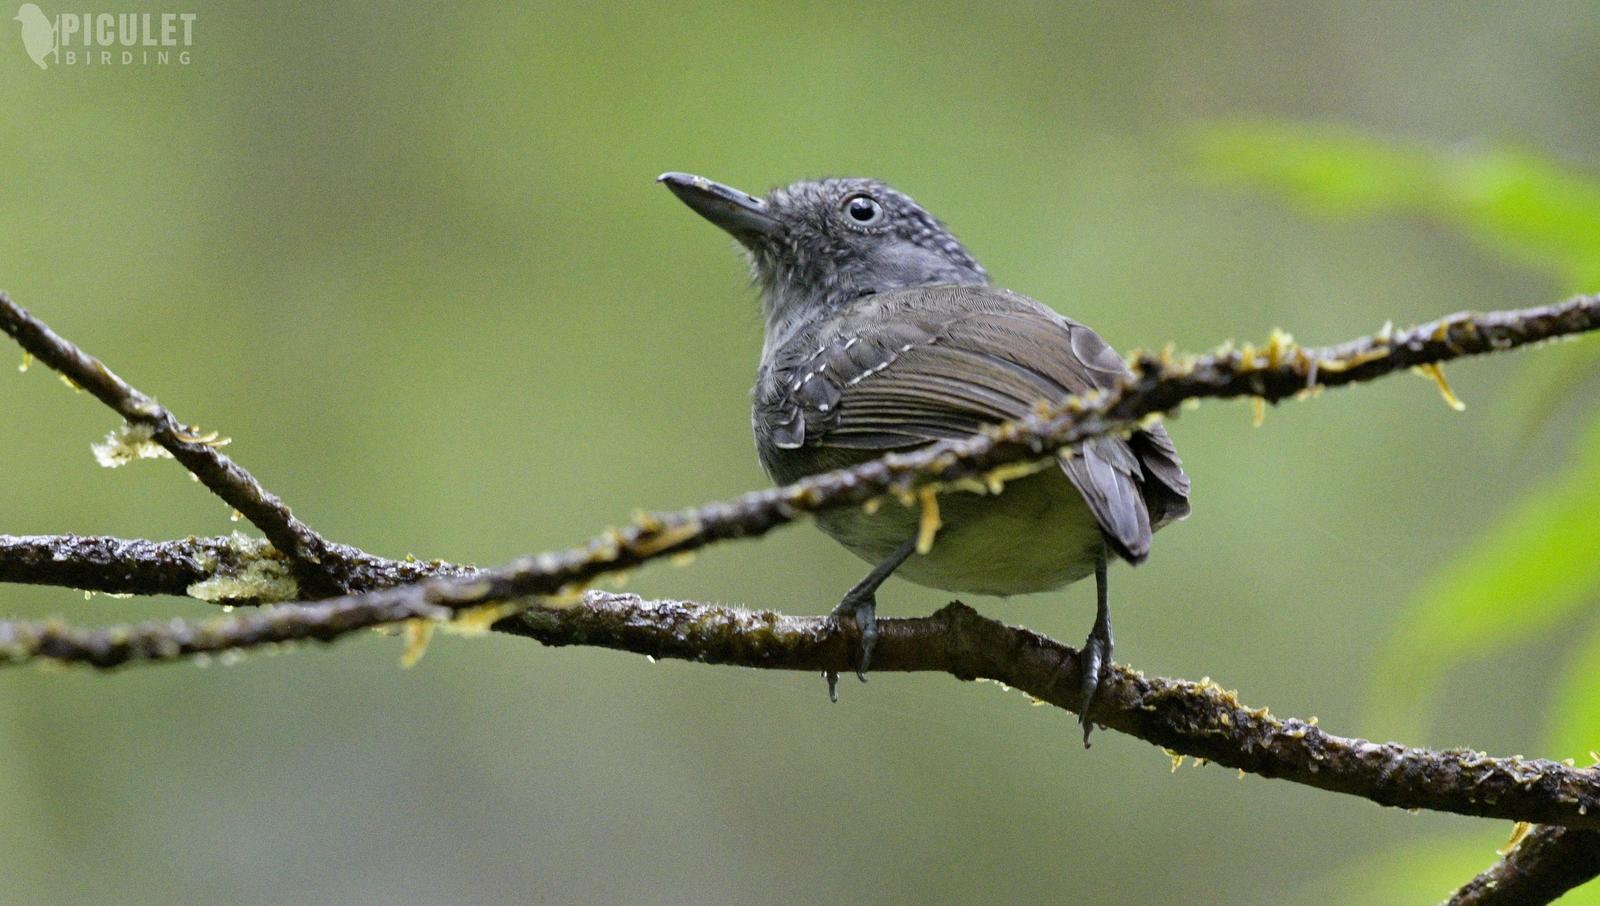 Spot-crowned Antvireo Photo by Julio Delgado